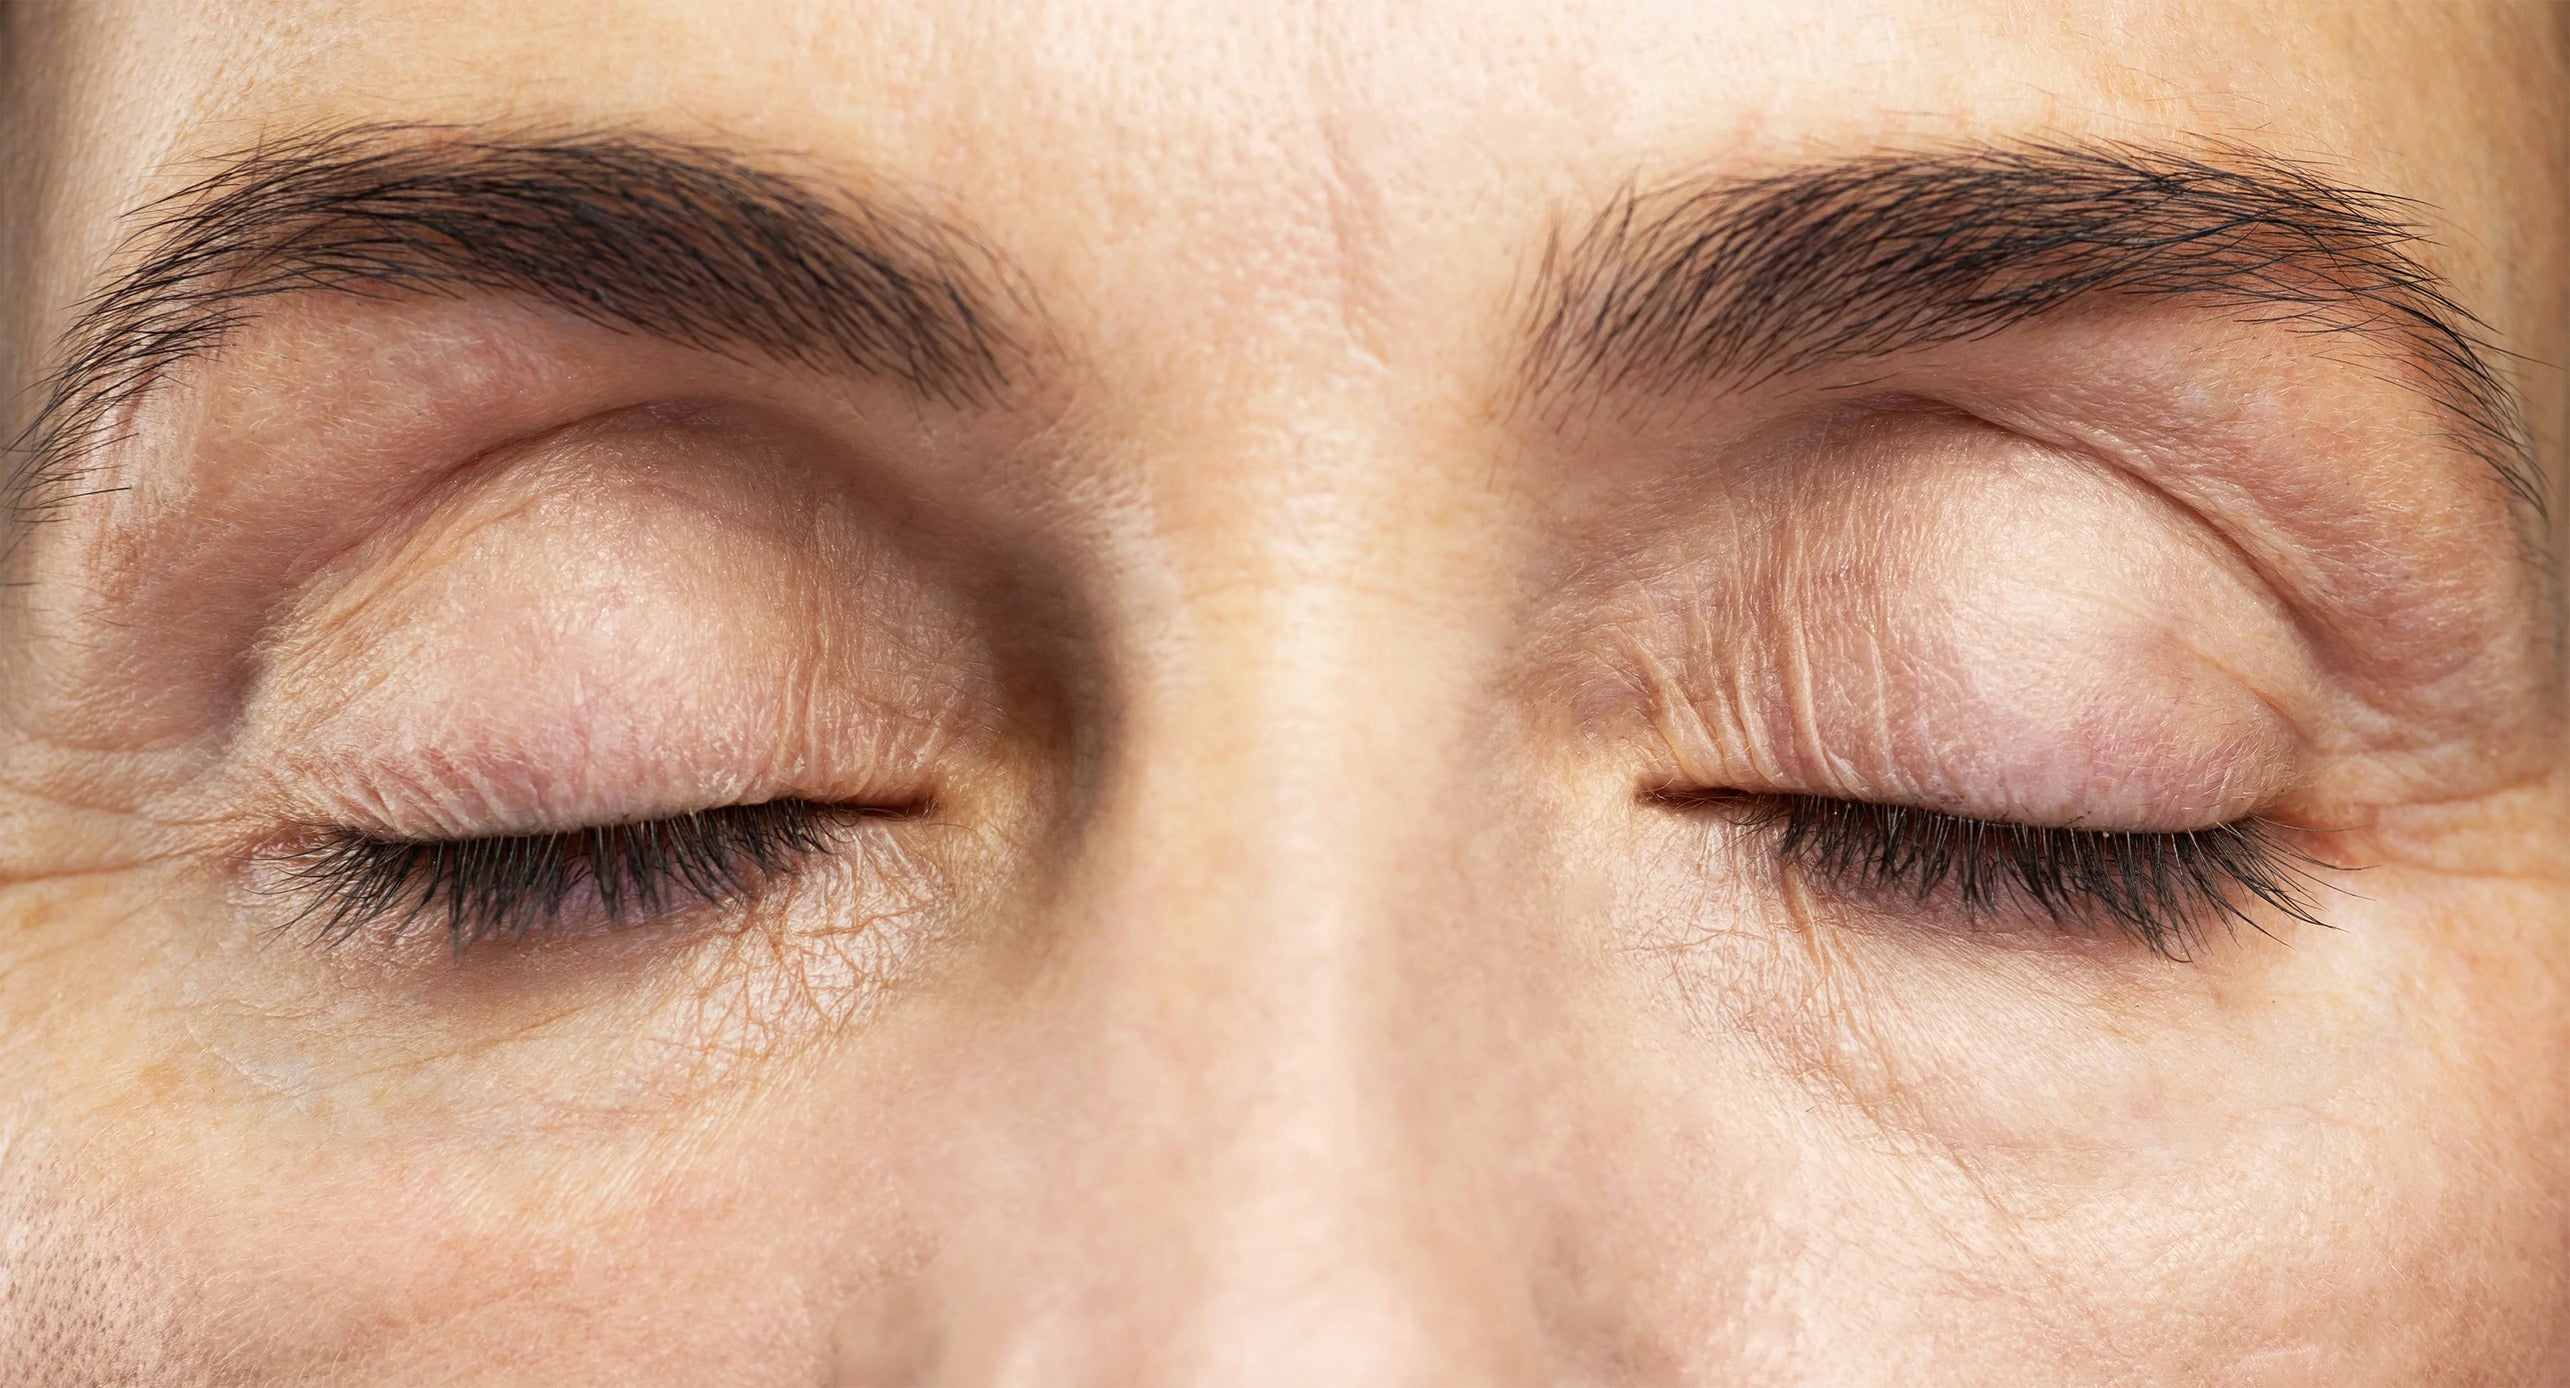 Before treatment close-up of aging skin around the eye area showing deep wrinkles and fine lines.